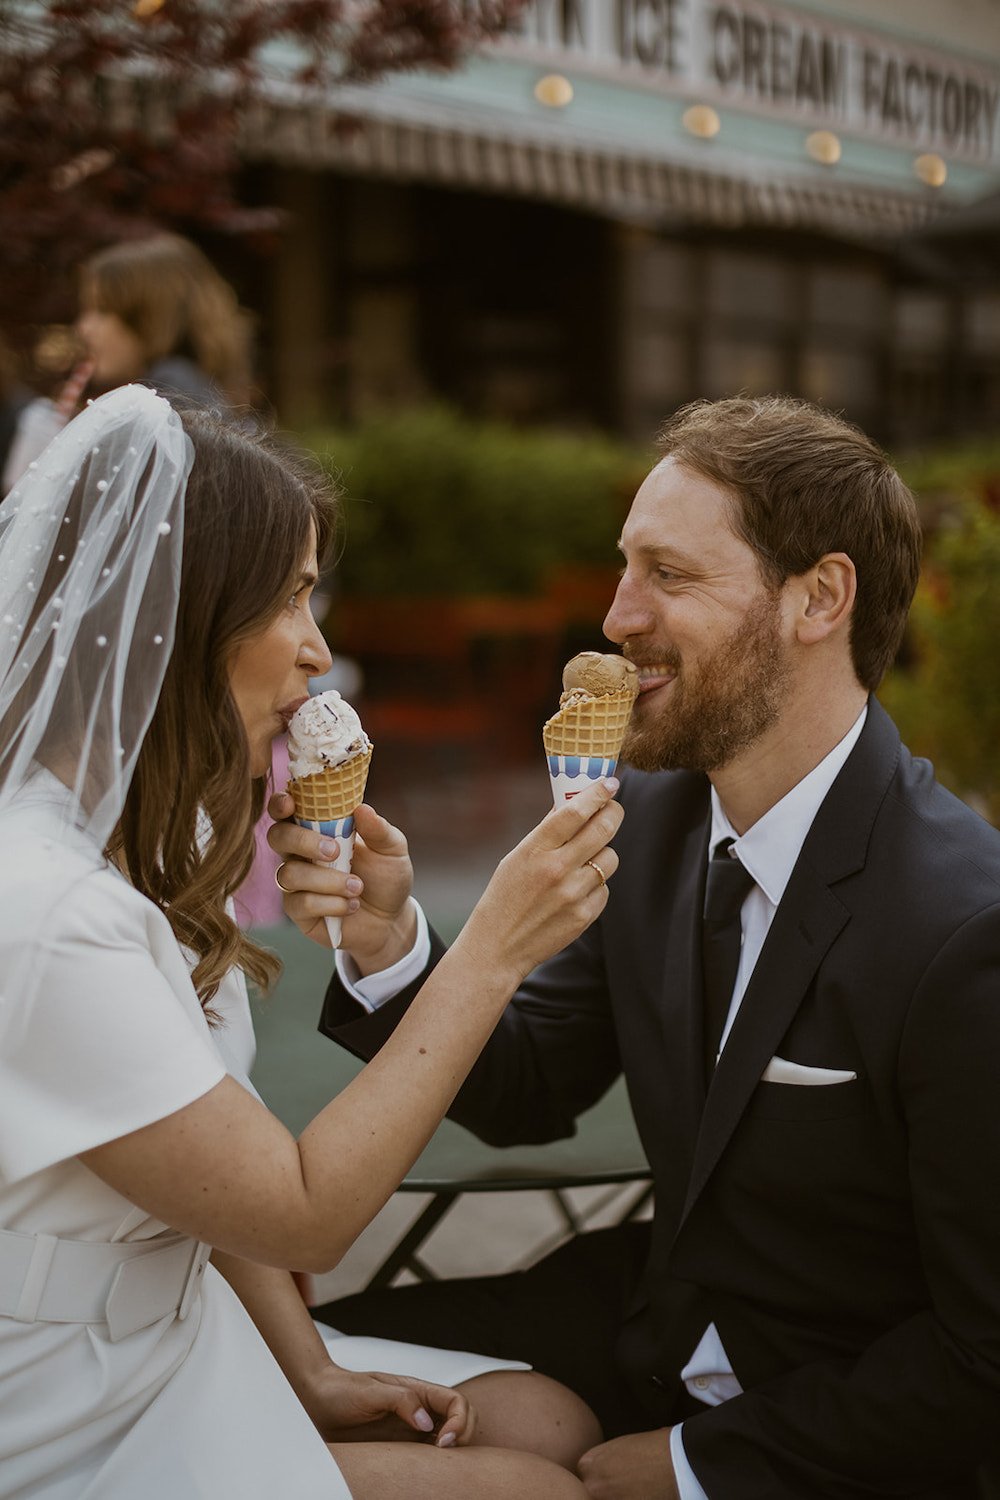 The couple share one anothers ice cream giving each other a little taste. 